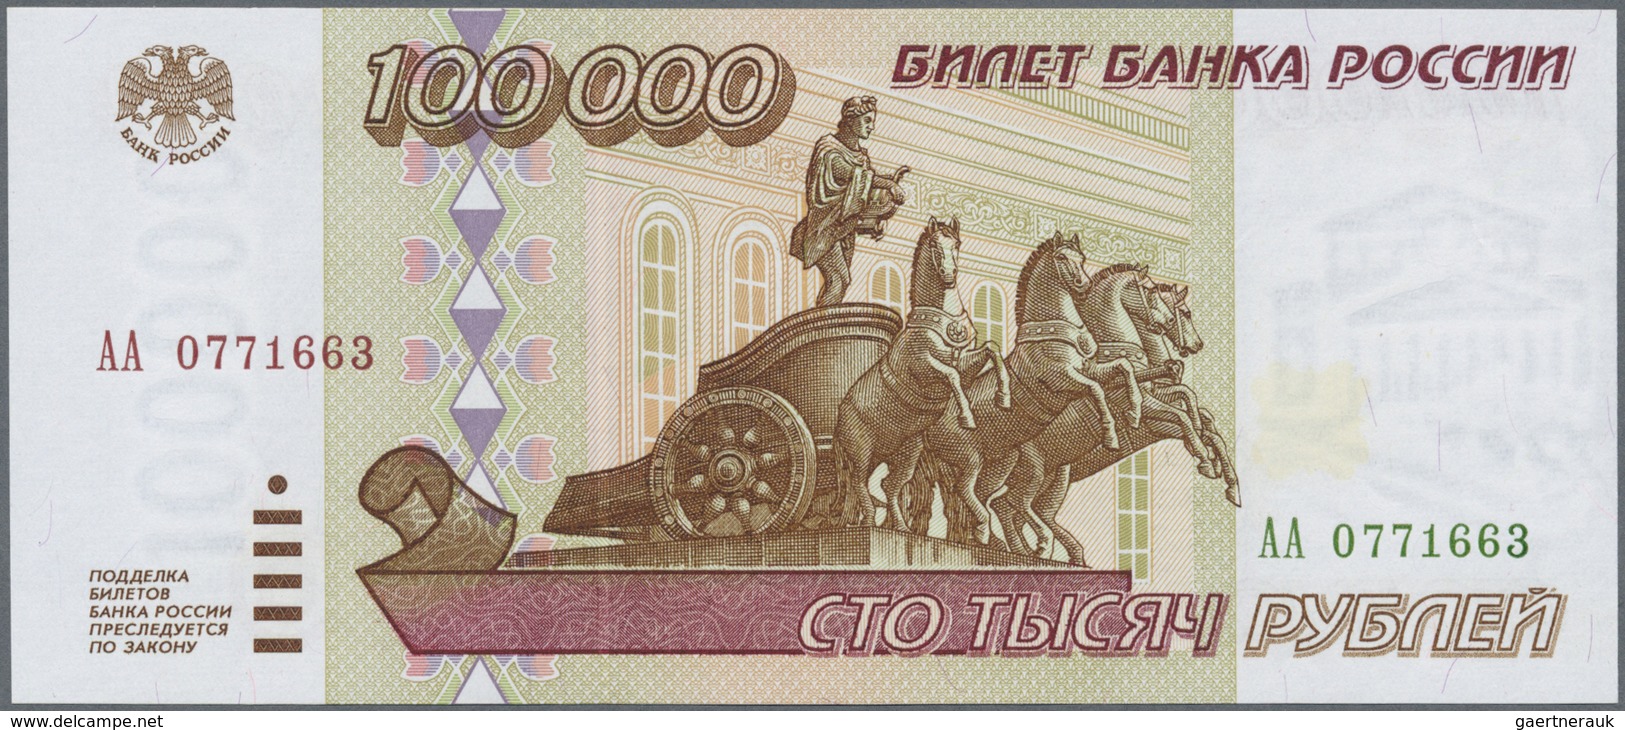 Russia / Russland: 100.000 Rubles 1995 P. 265 In Condition: XF. - Russie